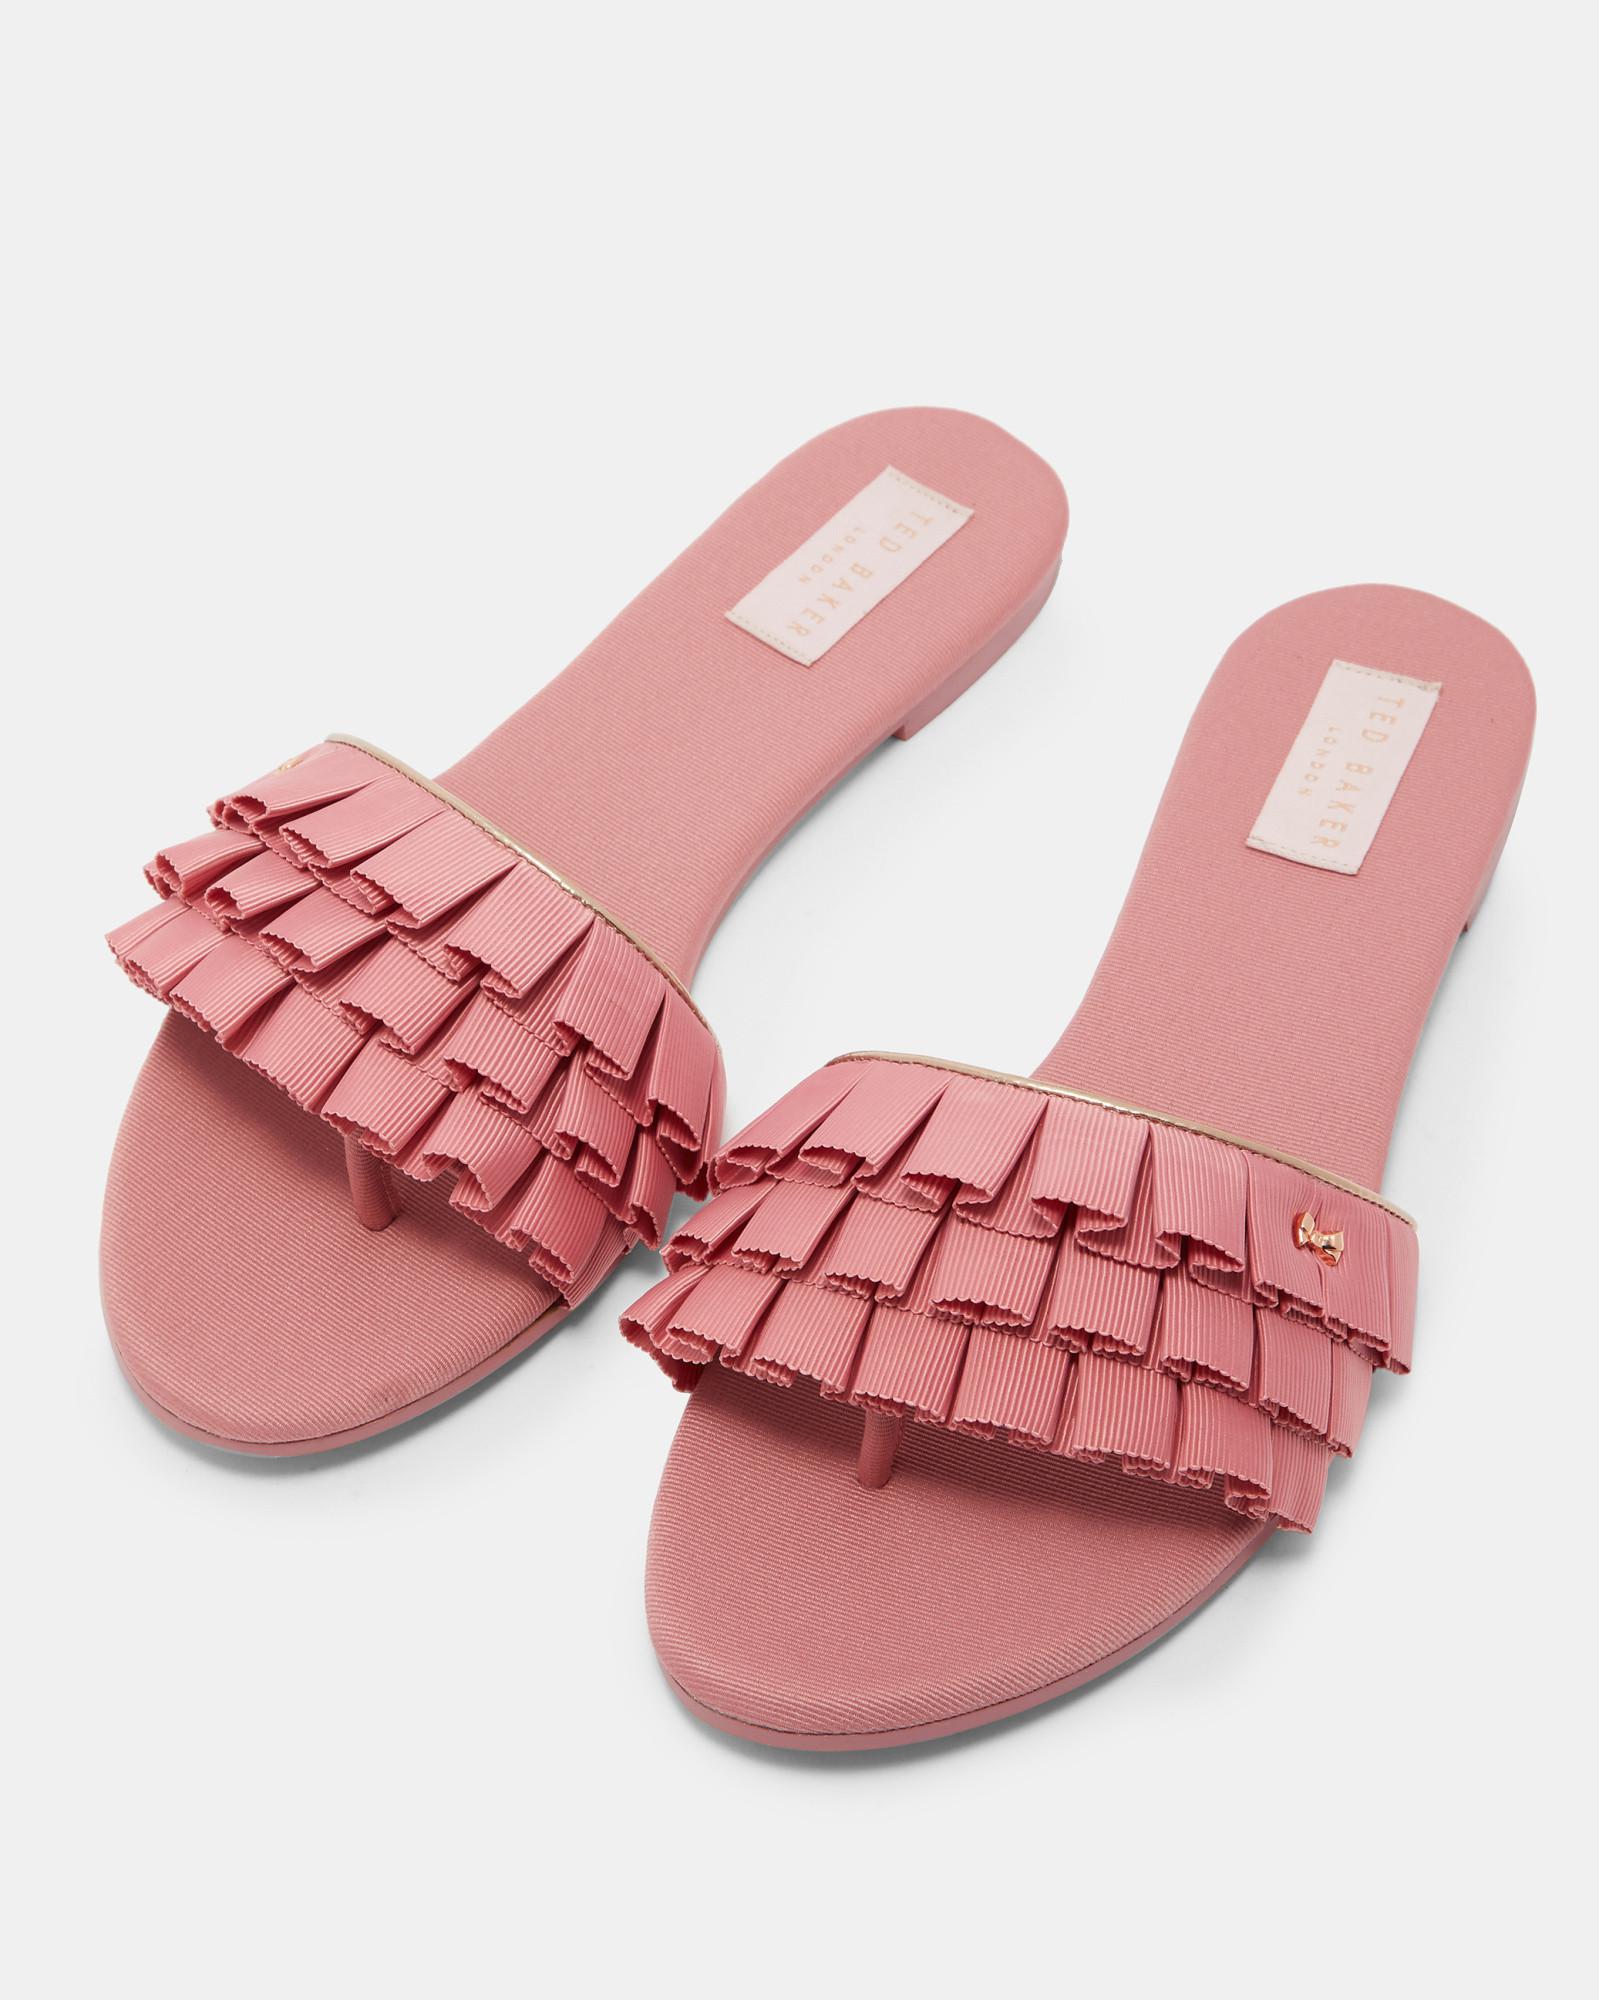 Ted Baker Synthetic Ruffle Bow Sliders in Pink - Lyst